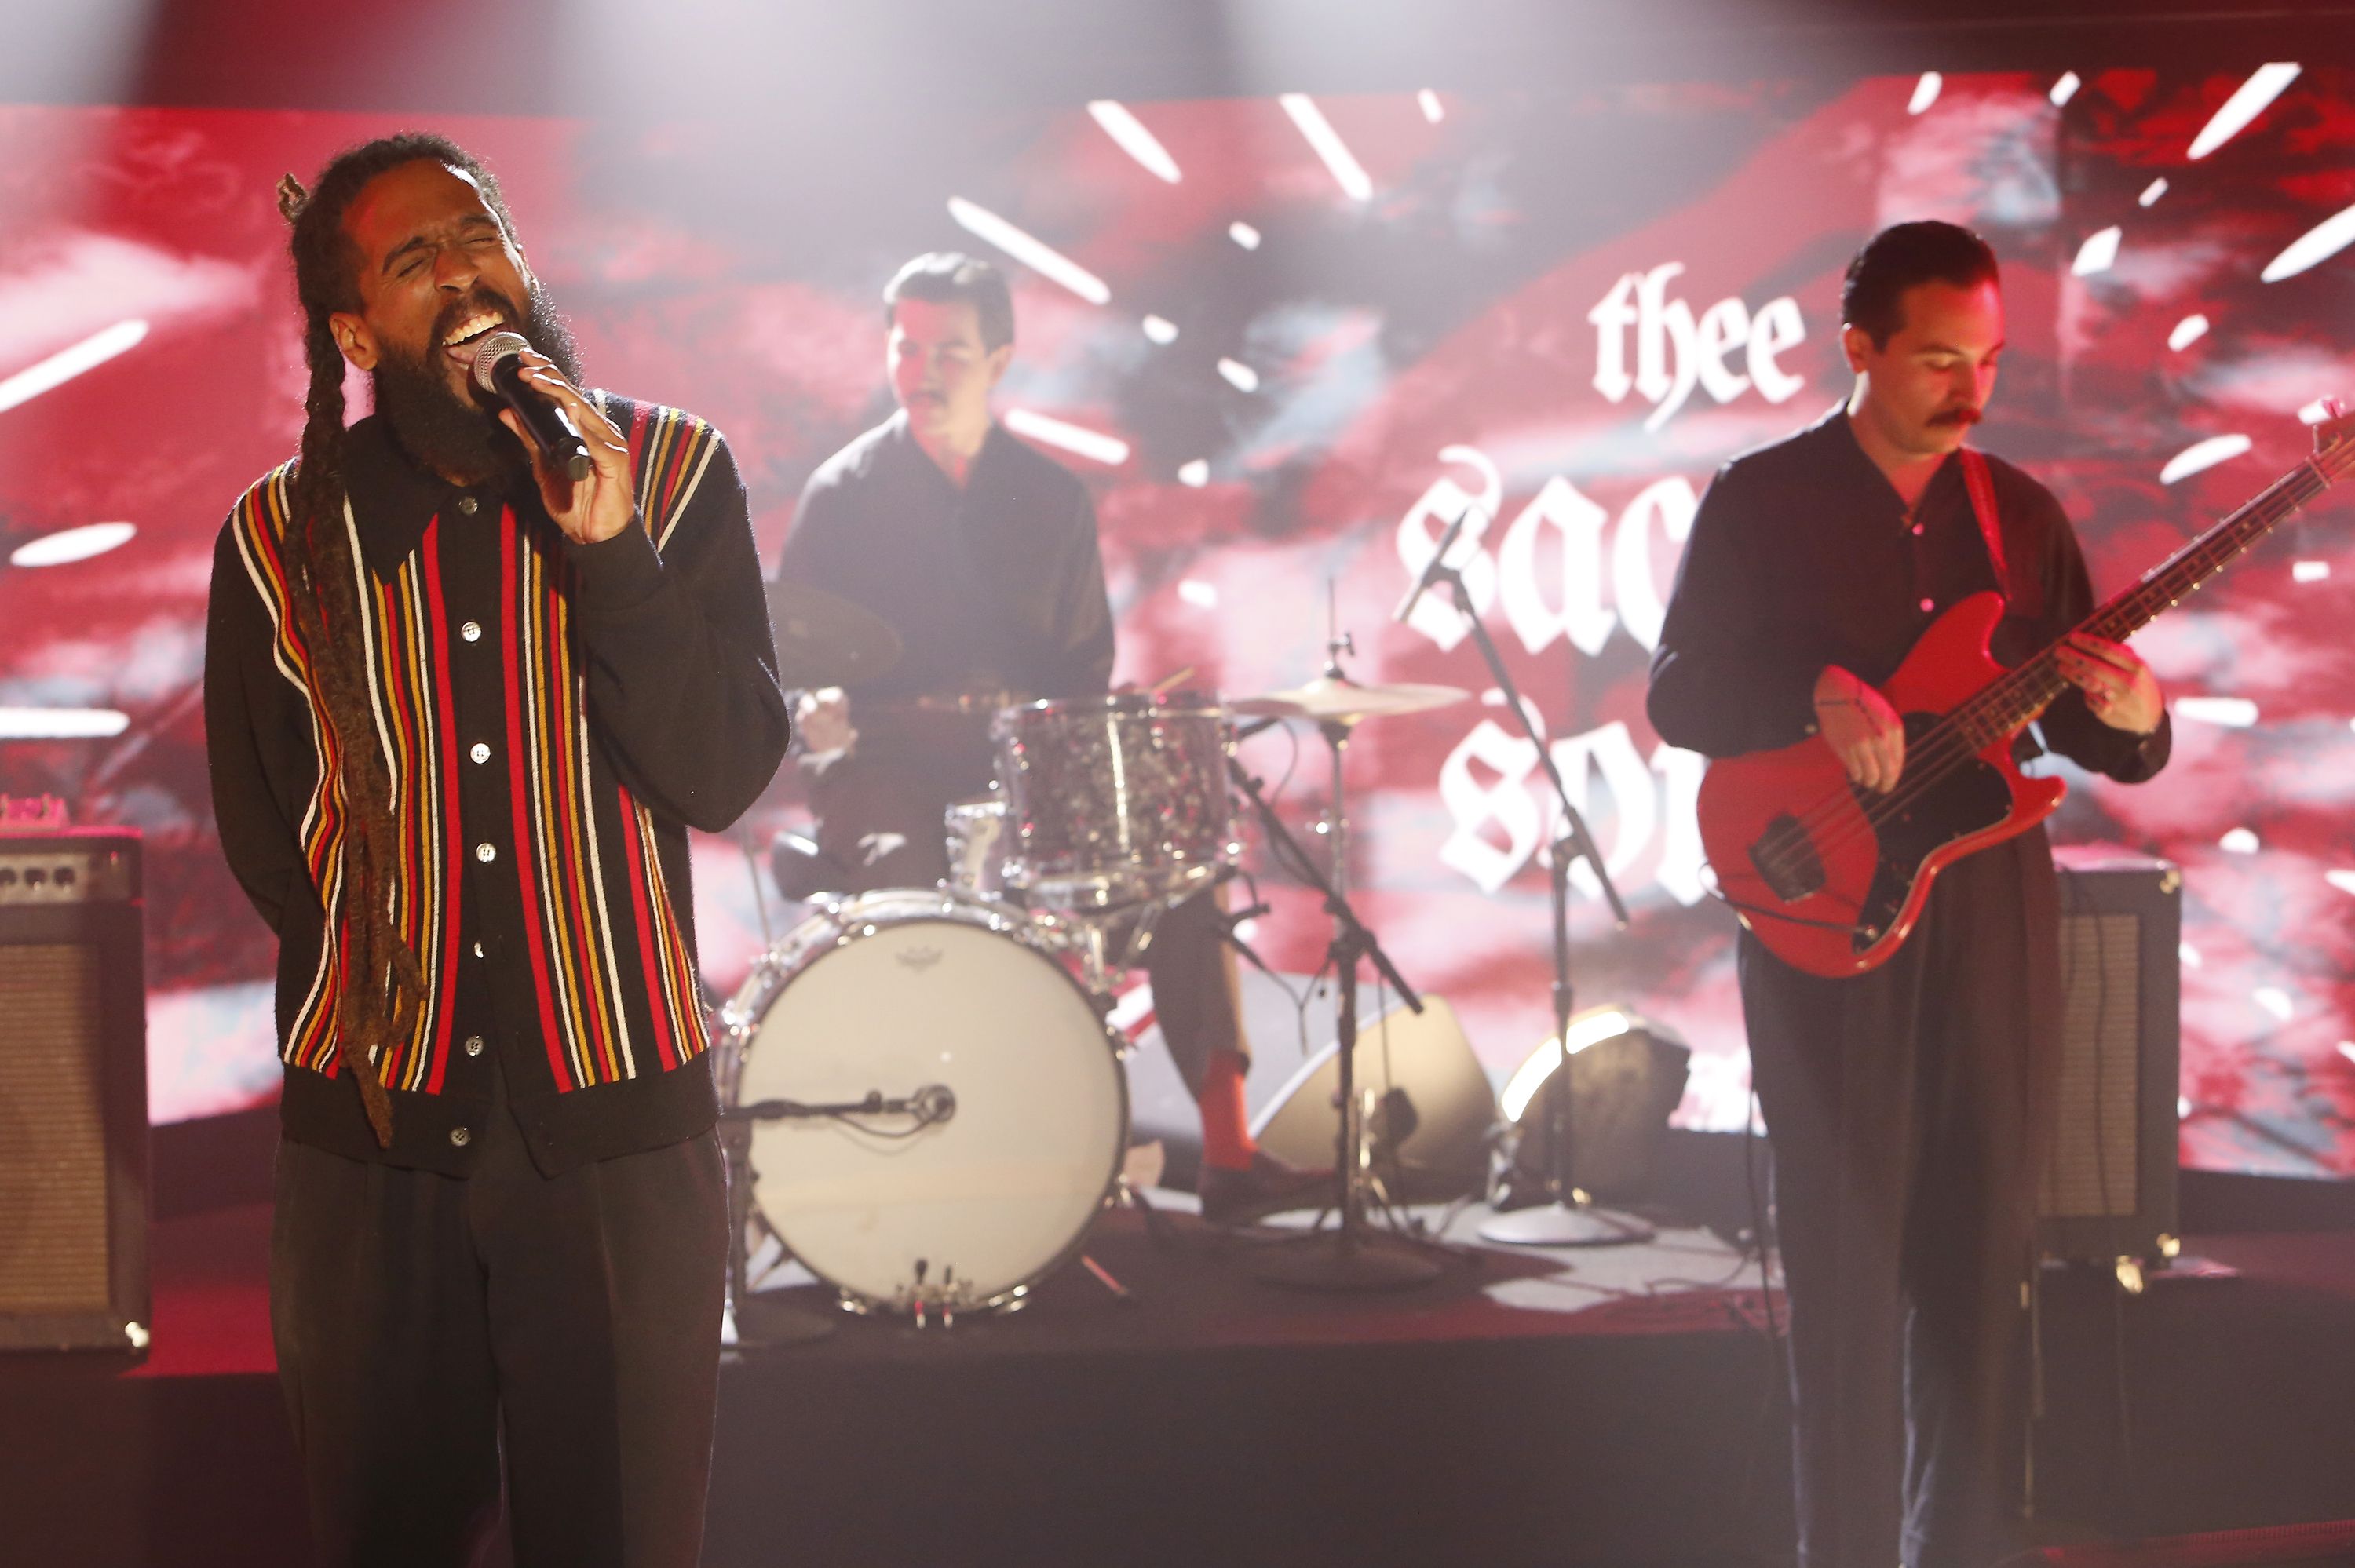 Thee Sacred Souls performs on "Jimmy Kimmel Live!" 